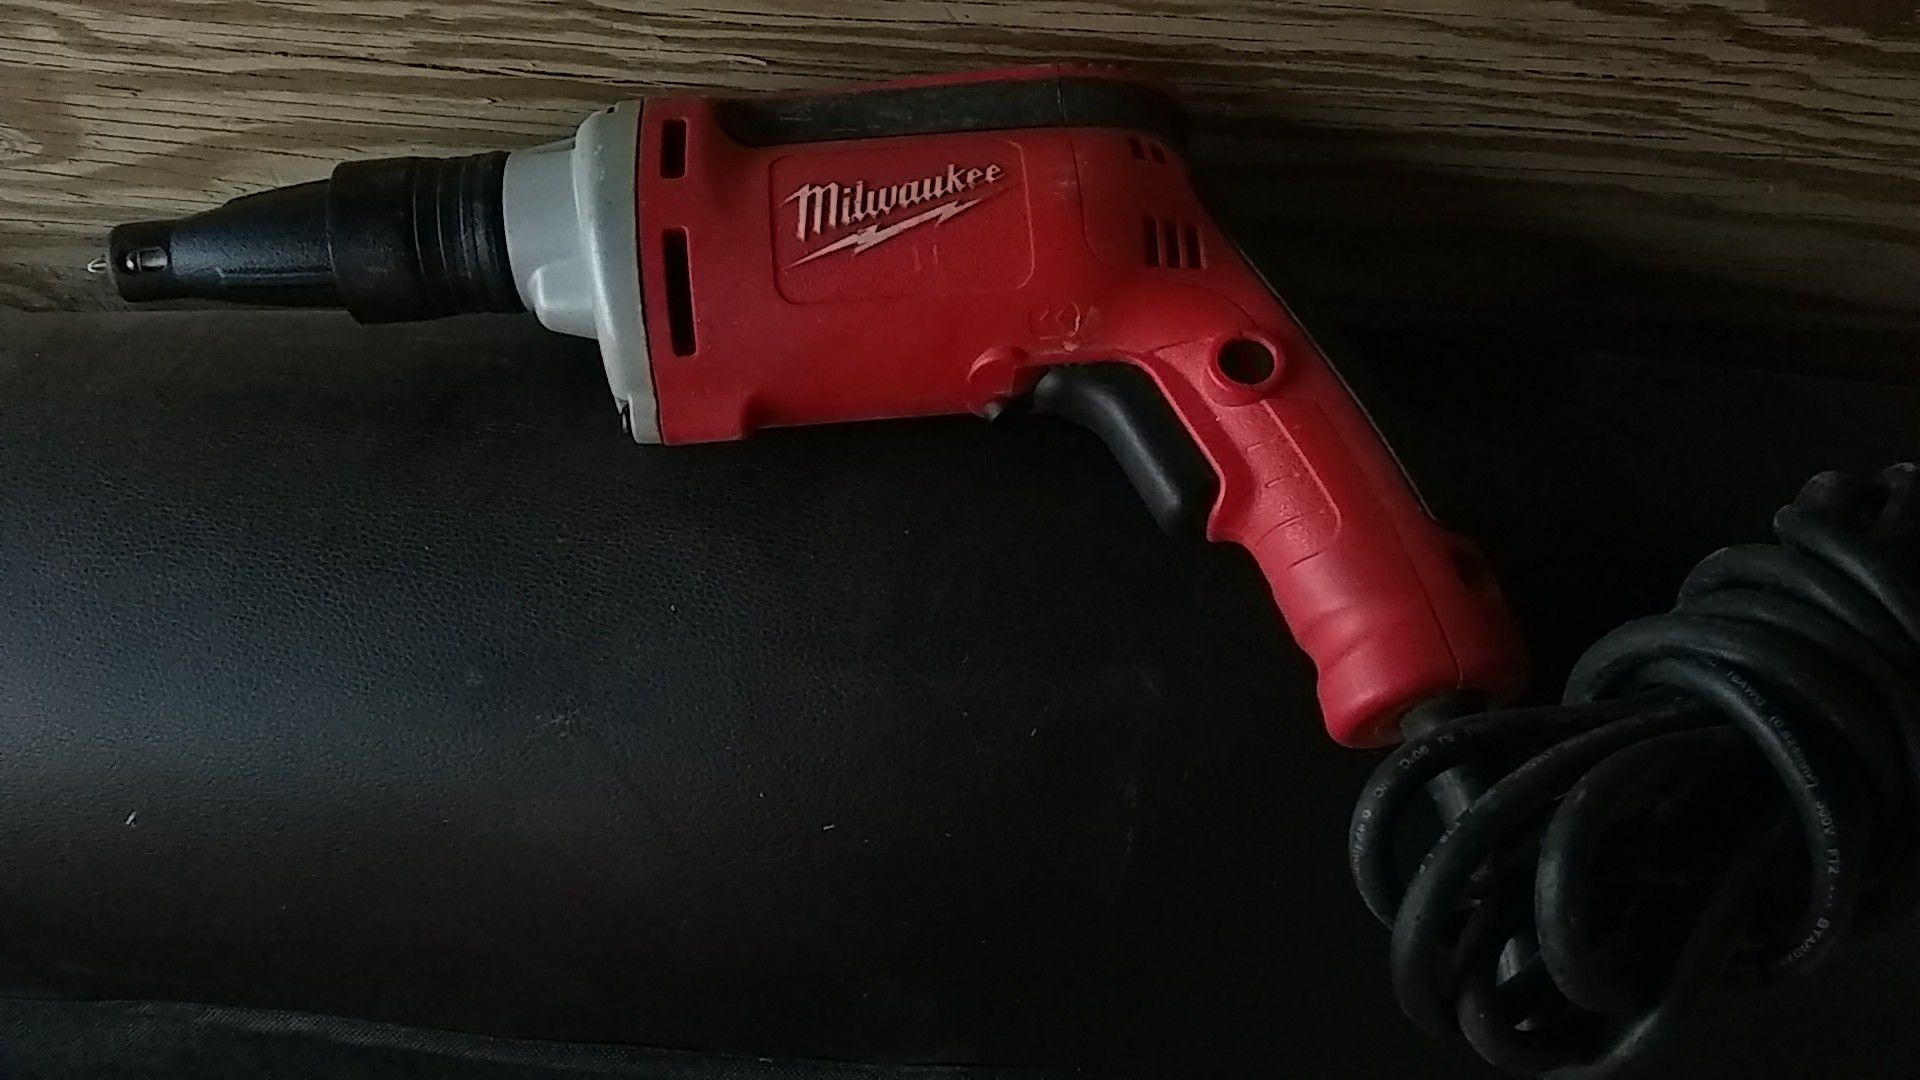 Milwaukee drywall drill with cord